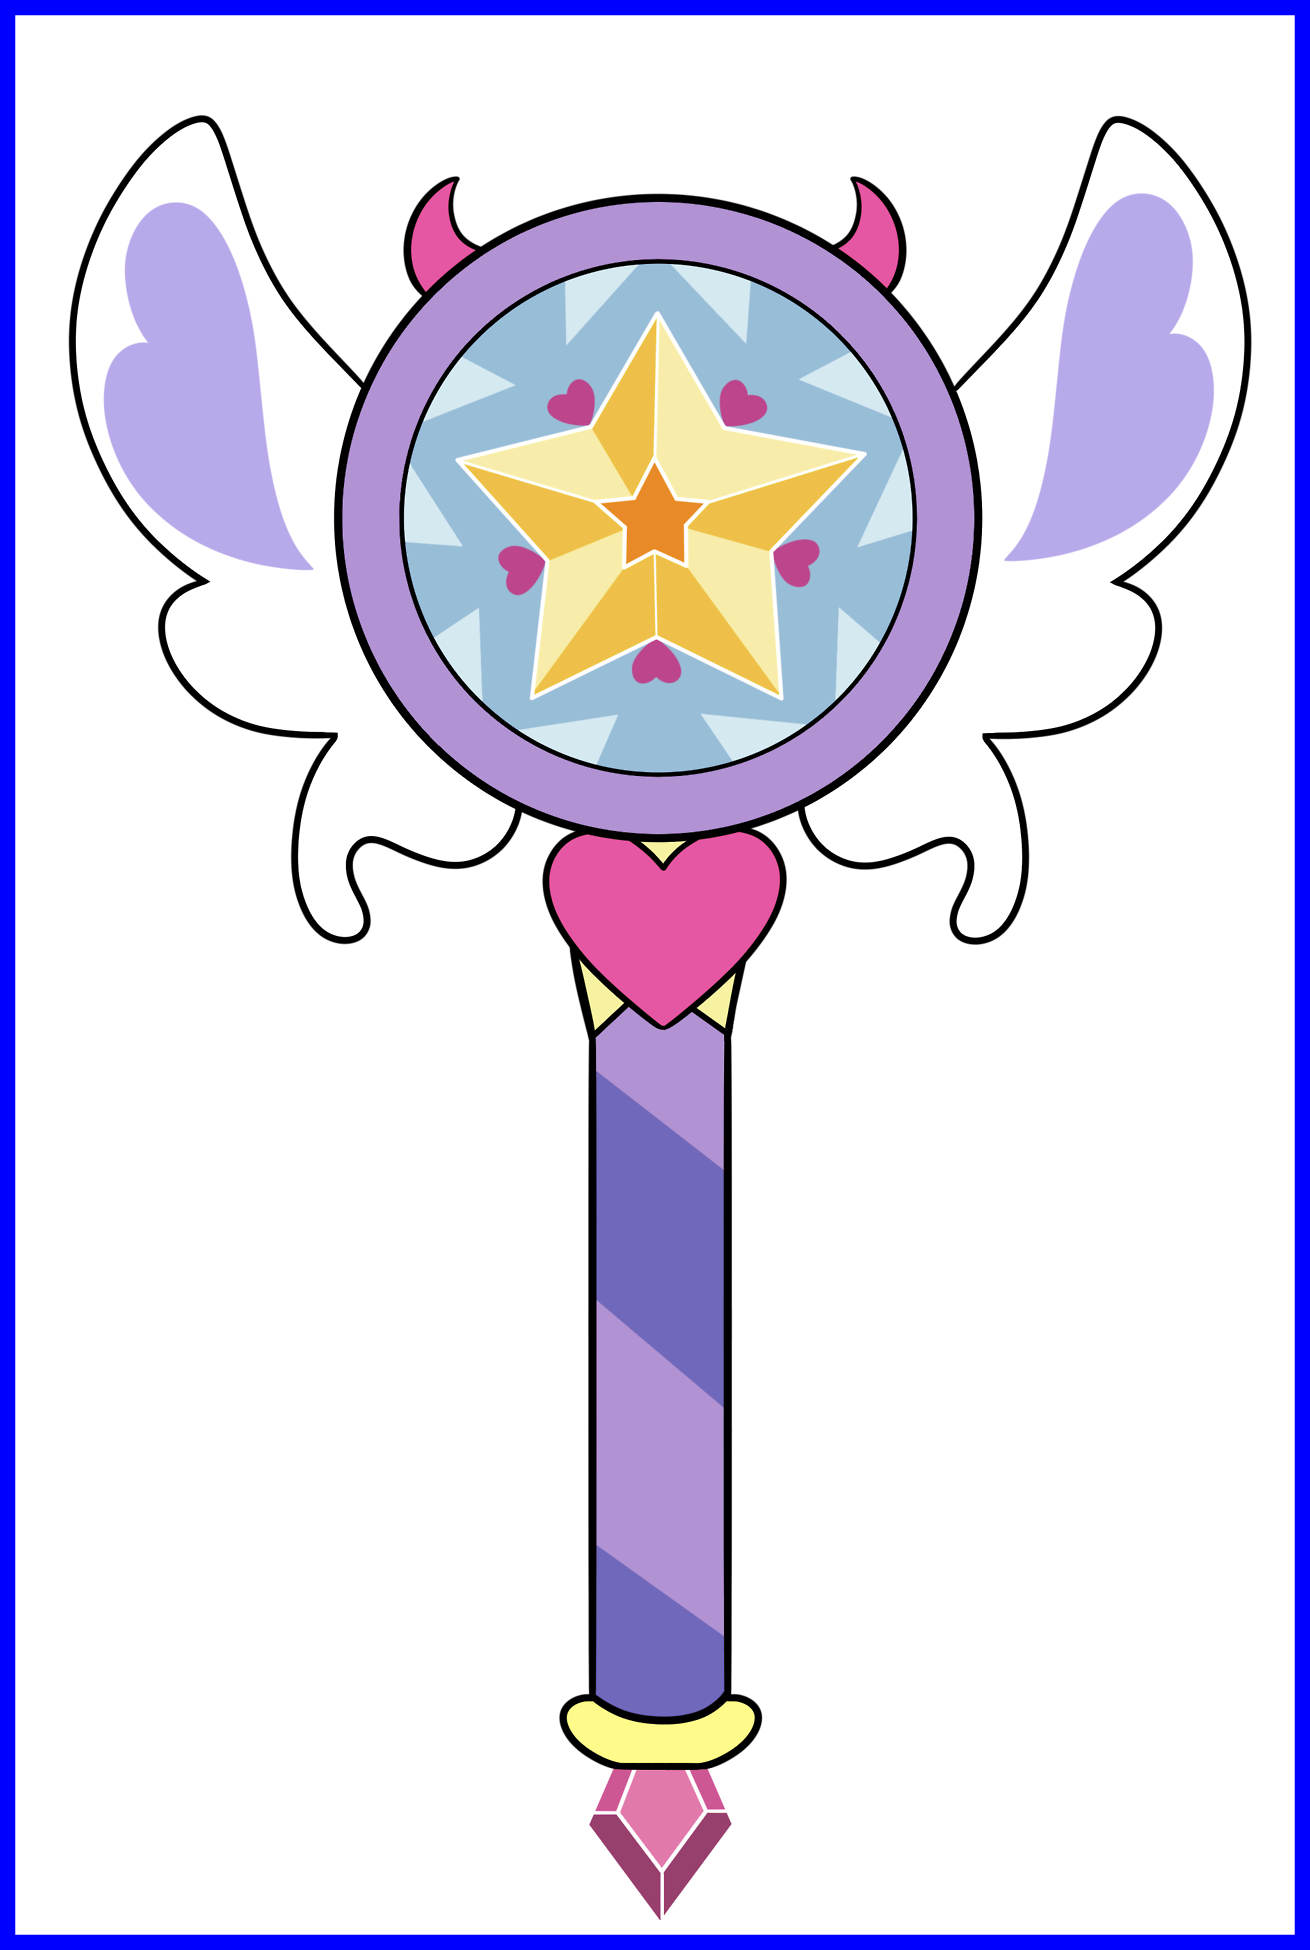 Best Trace Vector Tumblr Image For Clipart Of Butterfly - Star Butterfly Wand Season 3 (1310x1950)